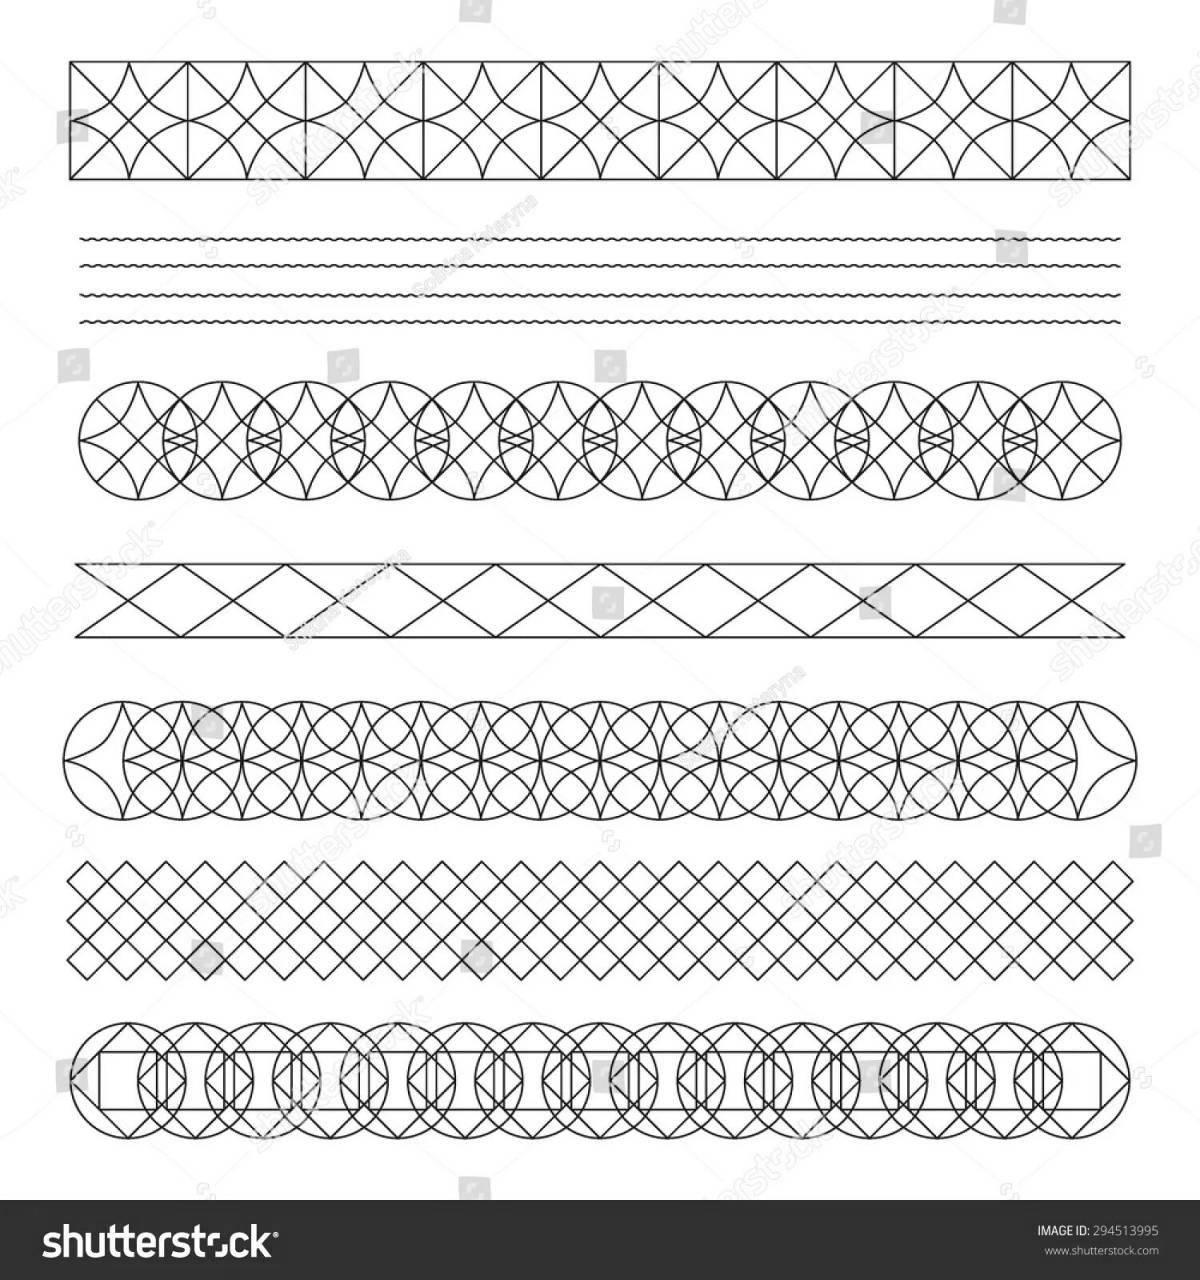 Coloring book cheerful striped pattern